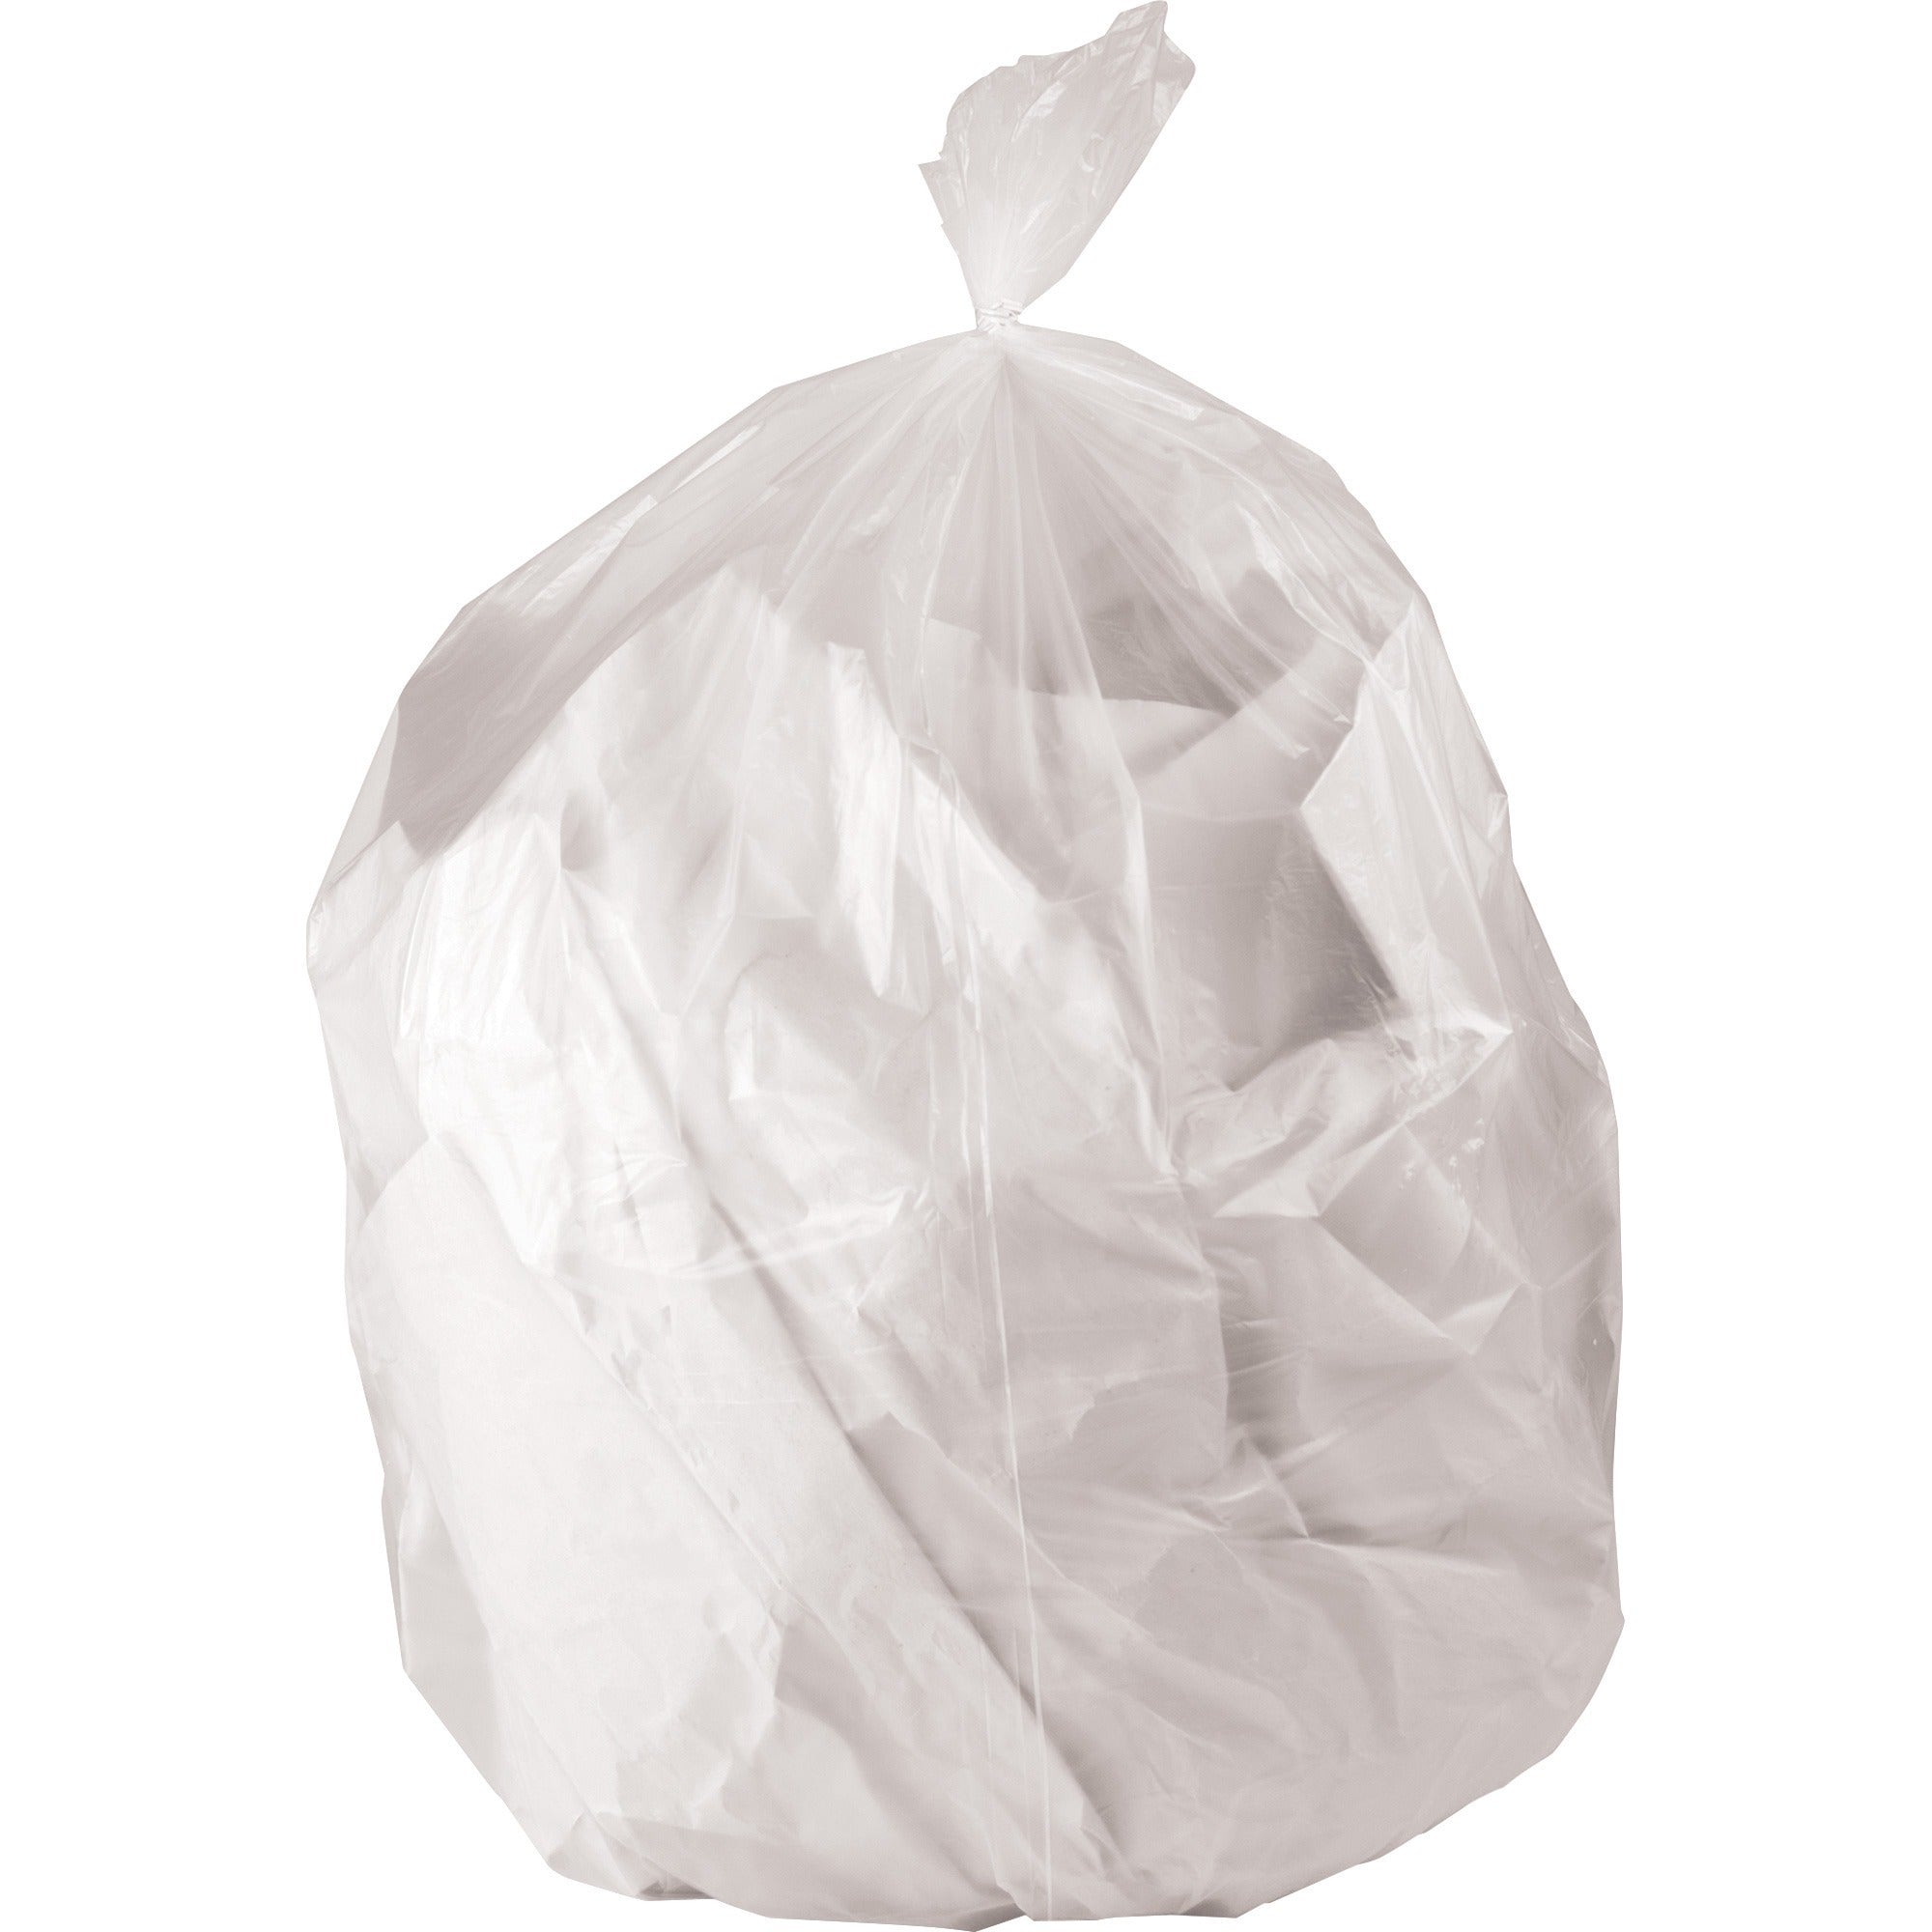 genuine-joe-strong-economical-trash-bags-33-gal-capacity-33-width-x-40-length-063-mil-16-micron-thickness-clear-resin-250-carton-waste-disposal_gjo02855 - 1